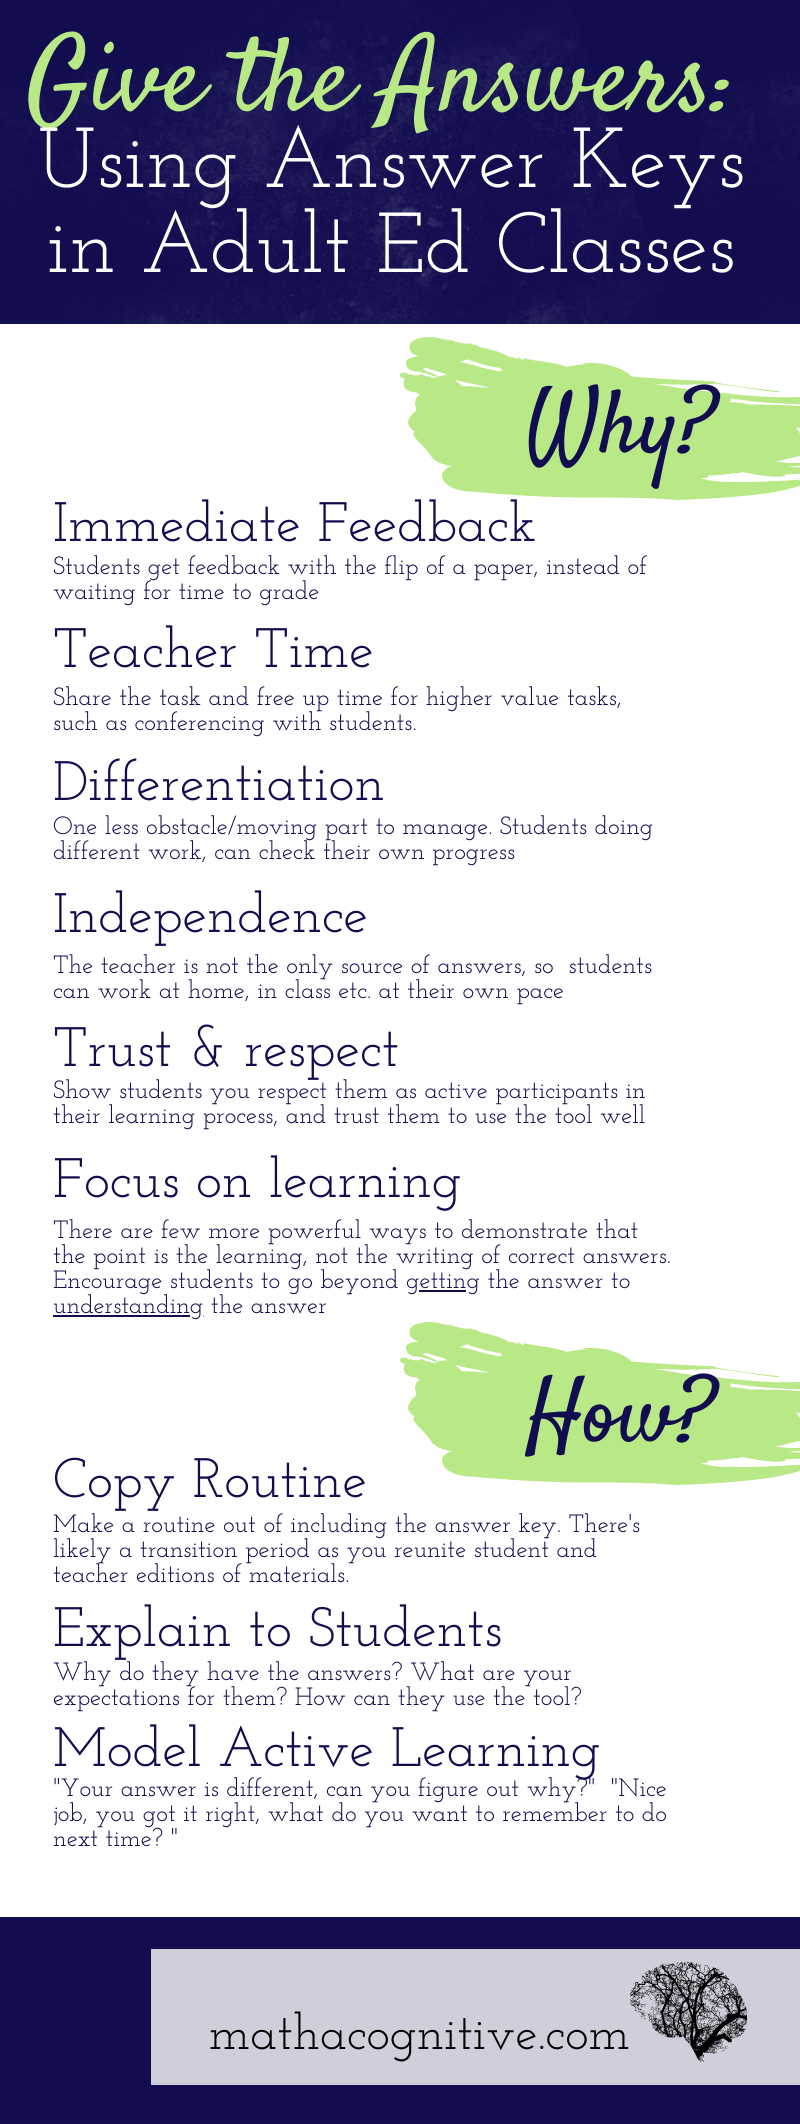 Infographic. Title"Give the Answers: Using Answer Keys in Adult Ed Classes" 
Why? 
Immediate Feedback
Teacher Time
Differentiation
Independence
Trust & Respect 
Focus on learning

How? 
Change copy routine
Explain to students
Model active learning